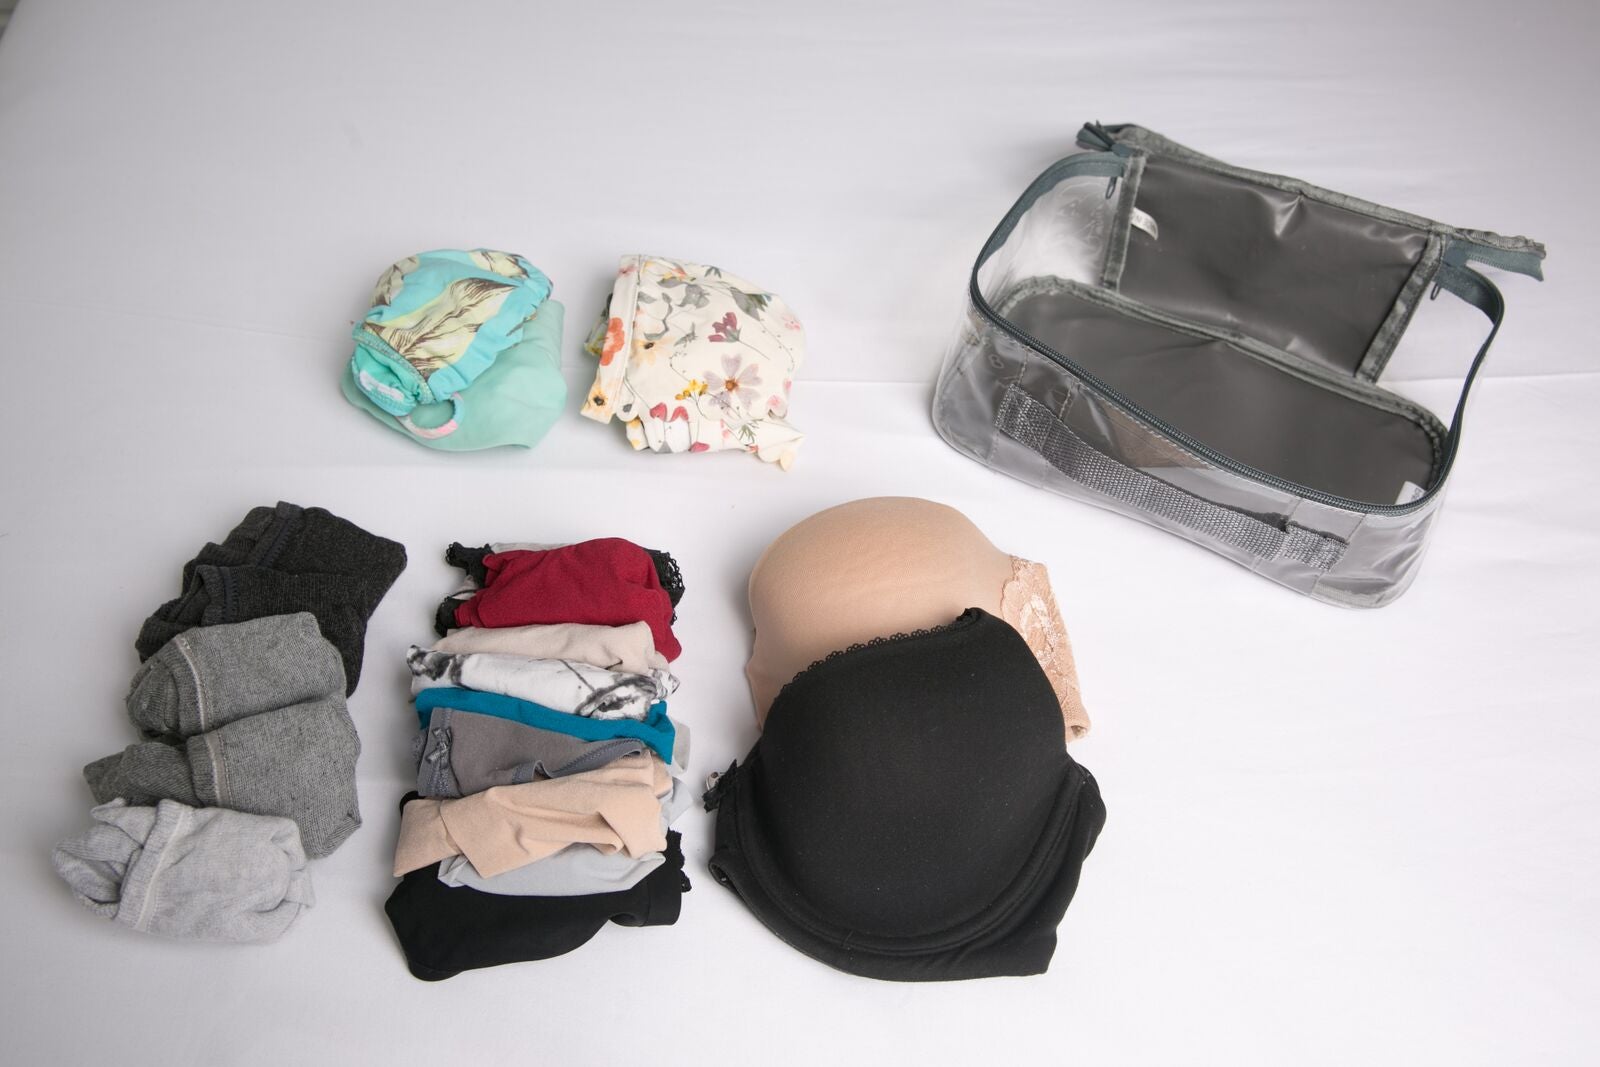 Underwear, bras and socks when packing light for 2-week vacation